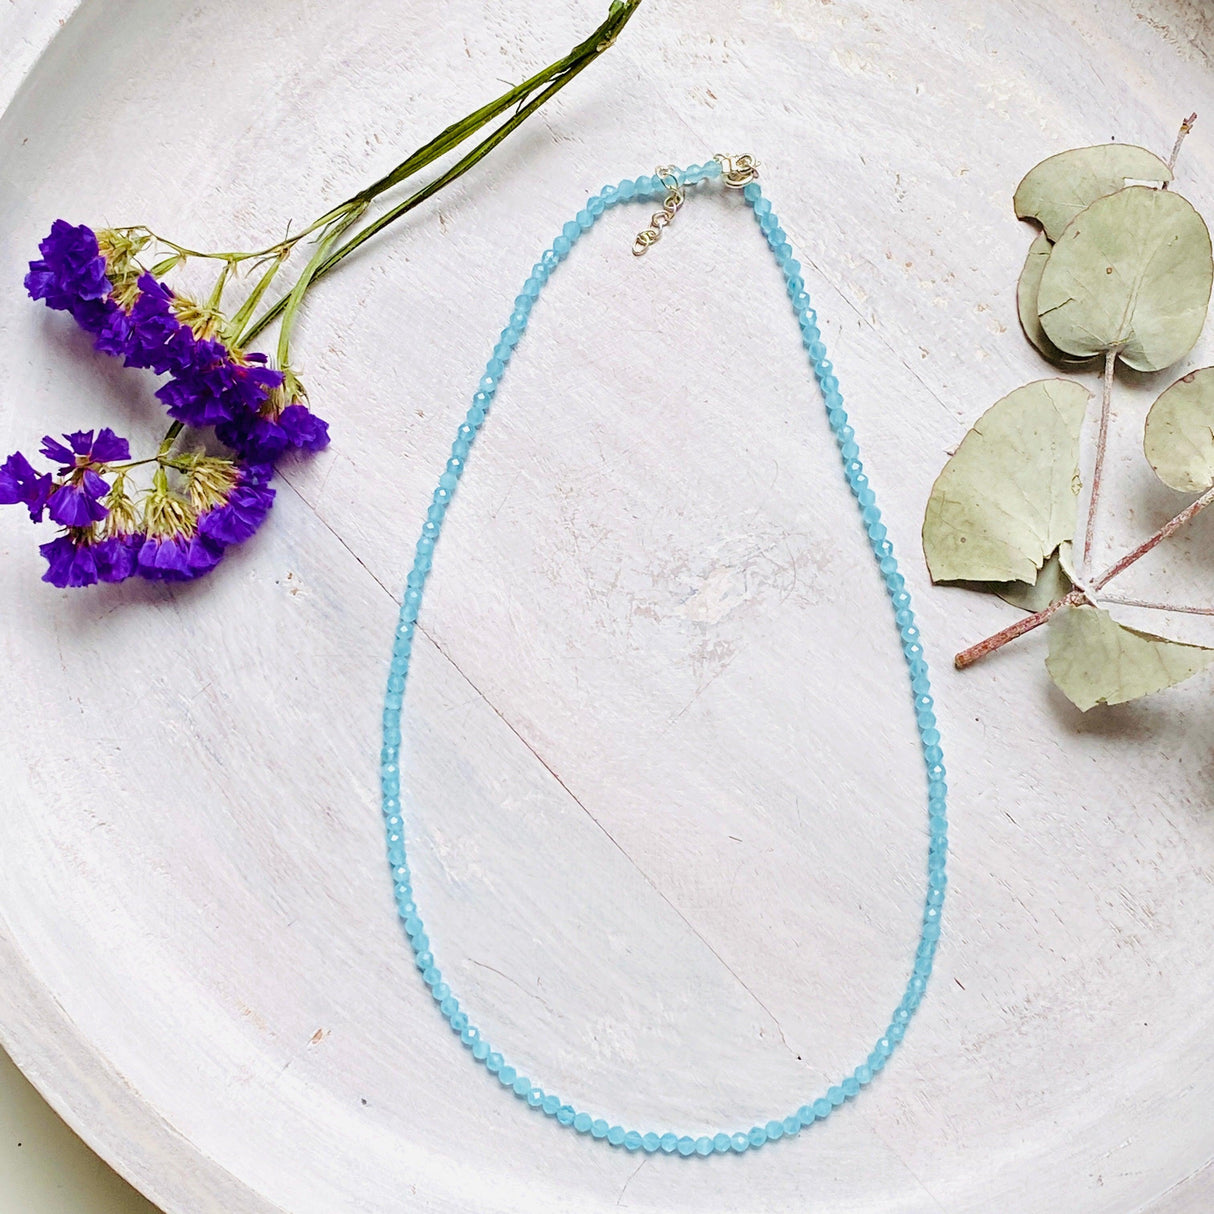 Micro Bead Necklace - Blue Chalcedony - Nature's Magick